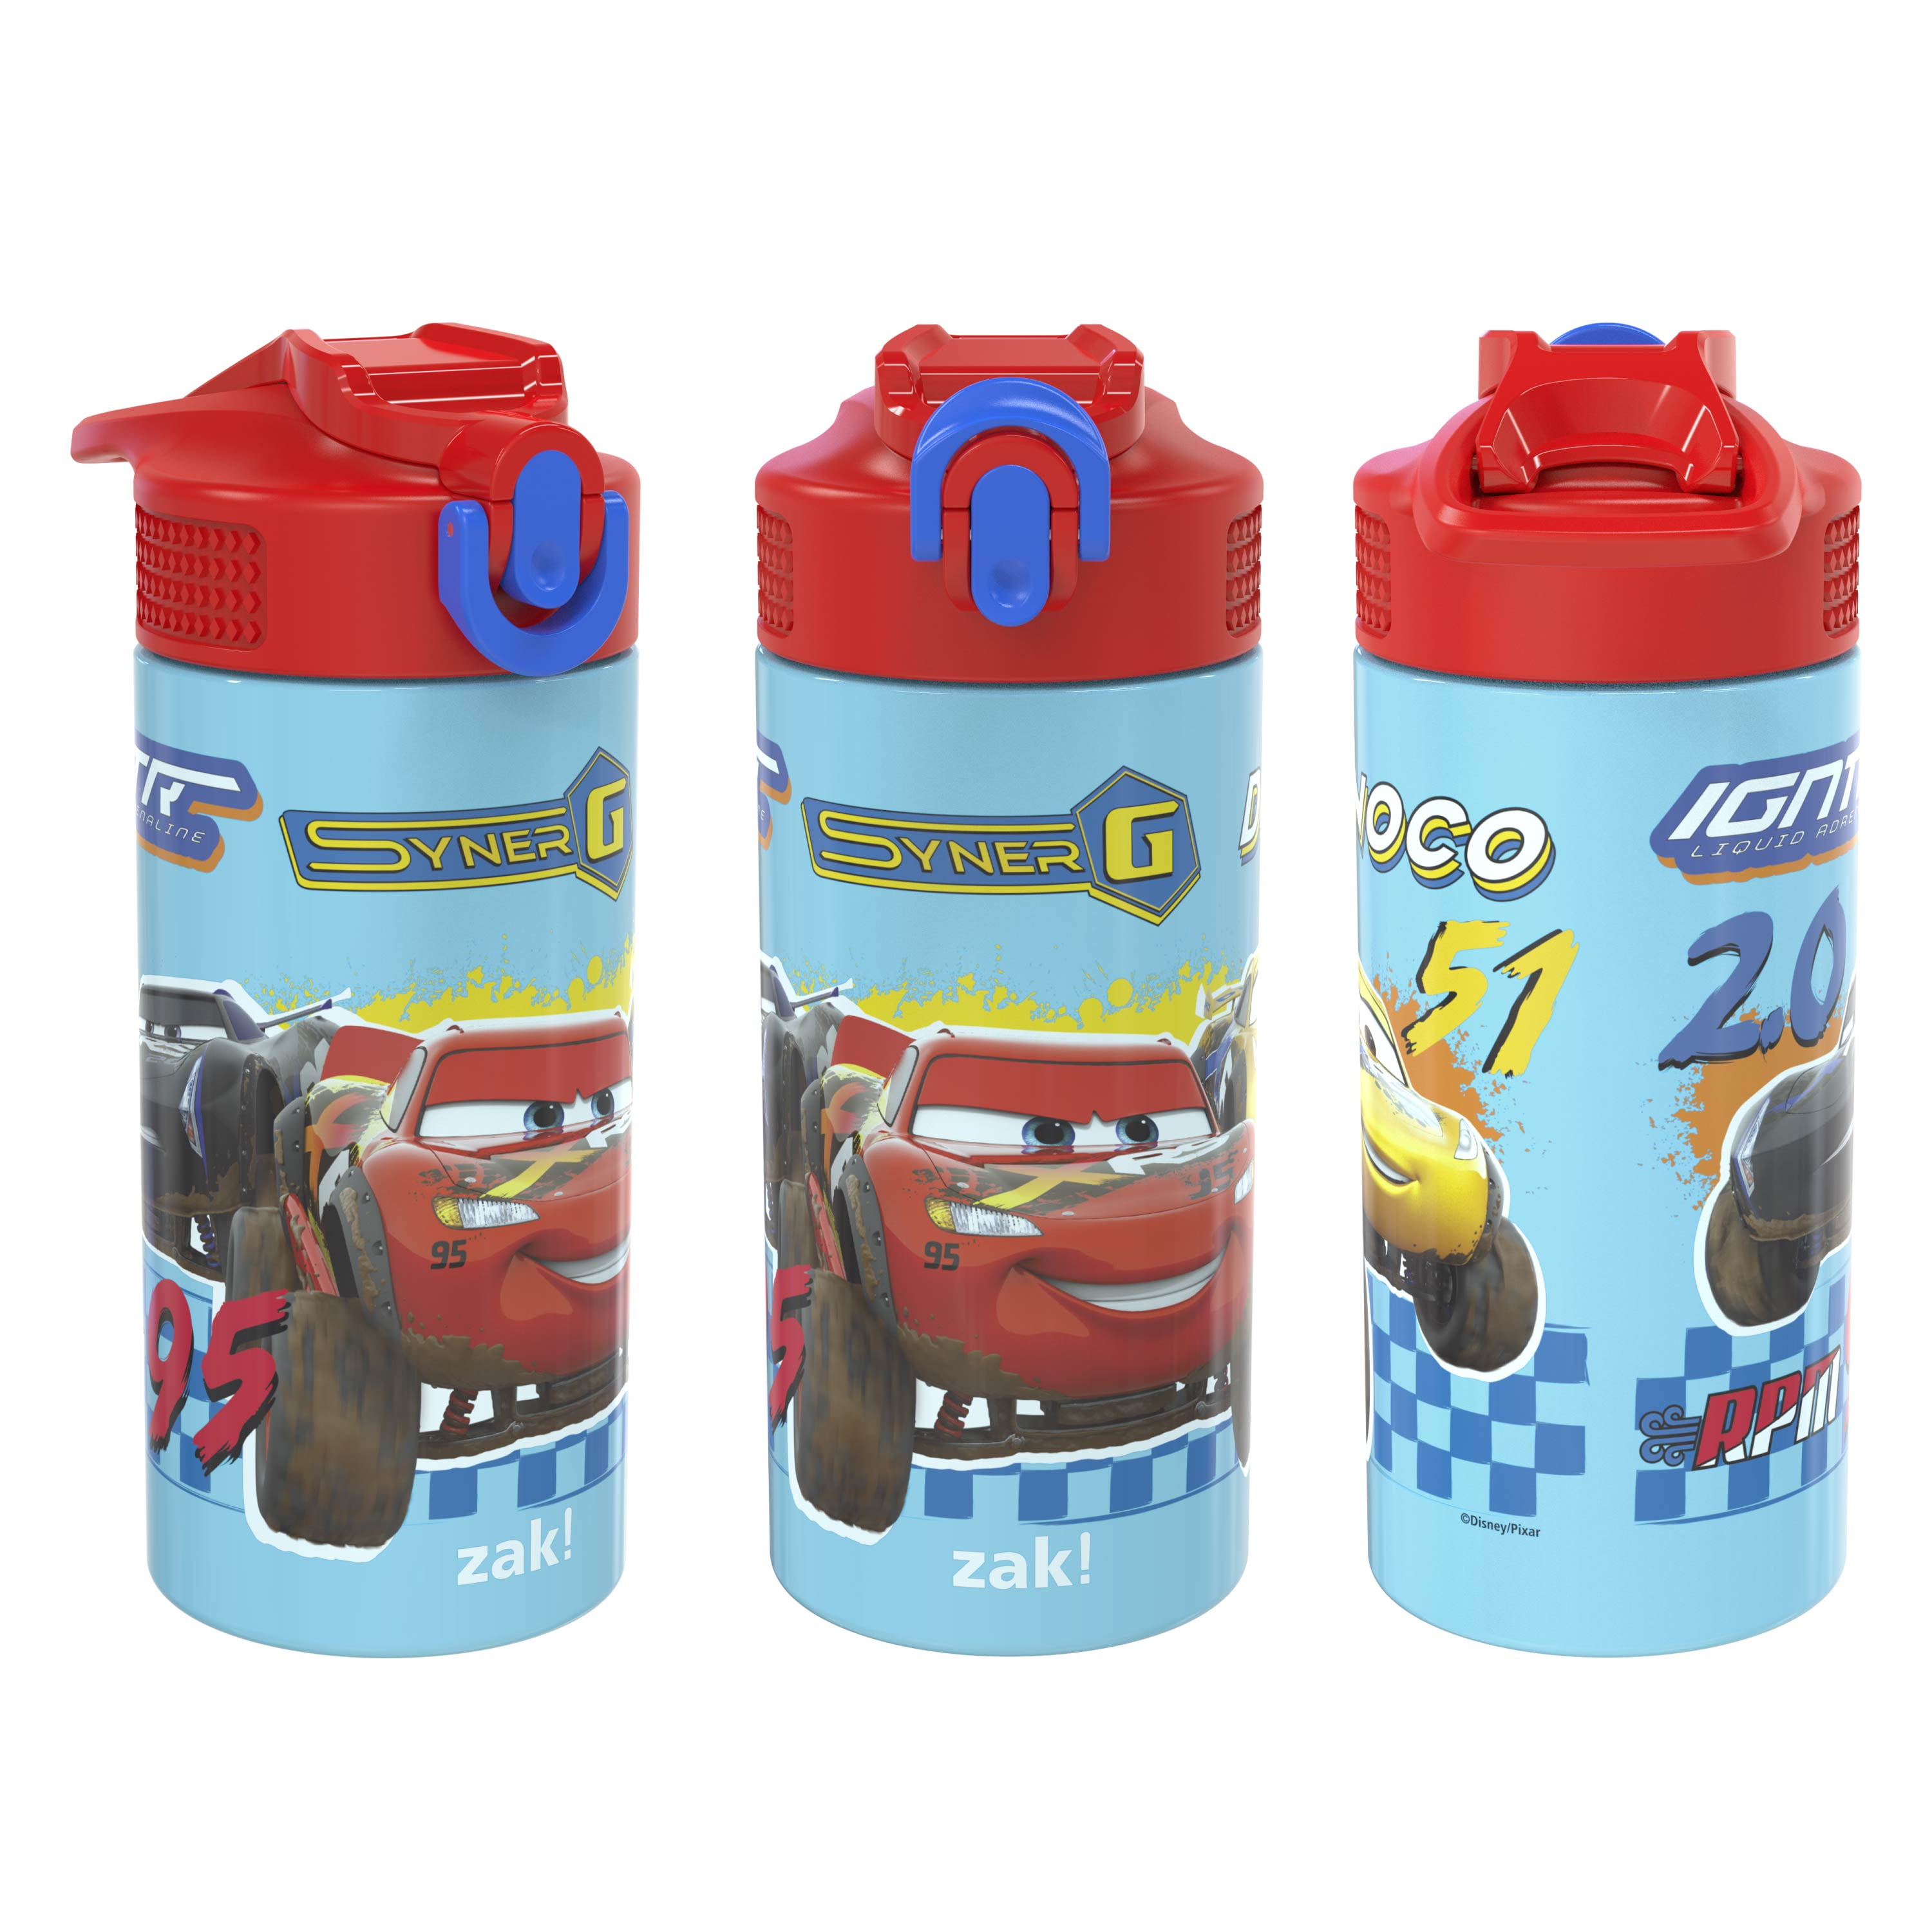 Zak! Designs Cars Lightning McQueen Plastic Cup with Lid and Straw  Red/Black 15 oz